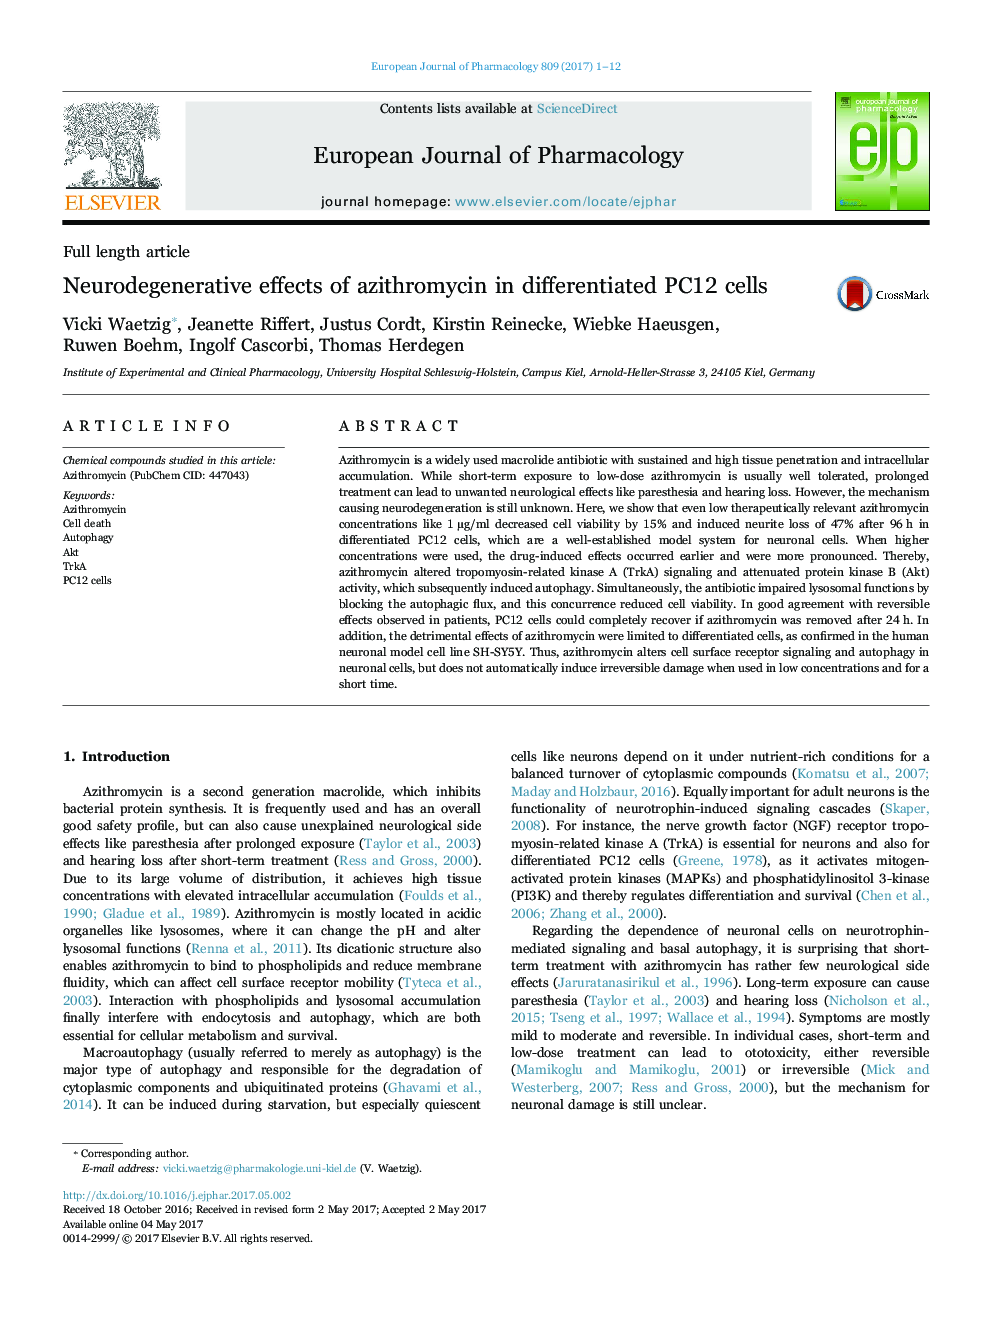 Neurodegenerative effects of azithromycin in differentiated PC12 cells